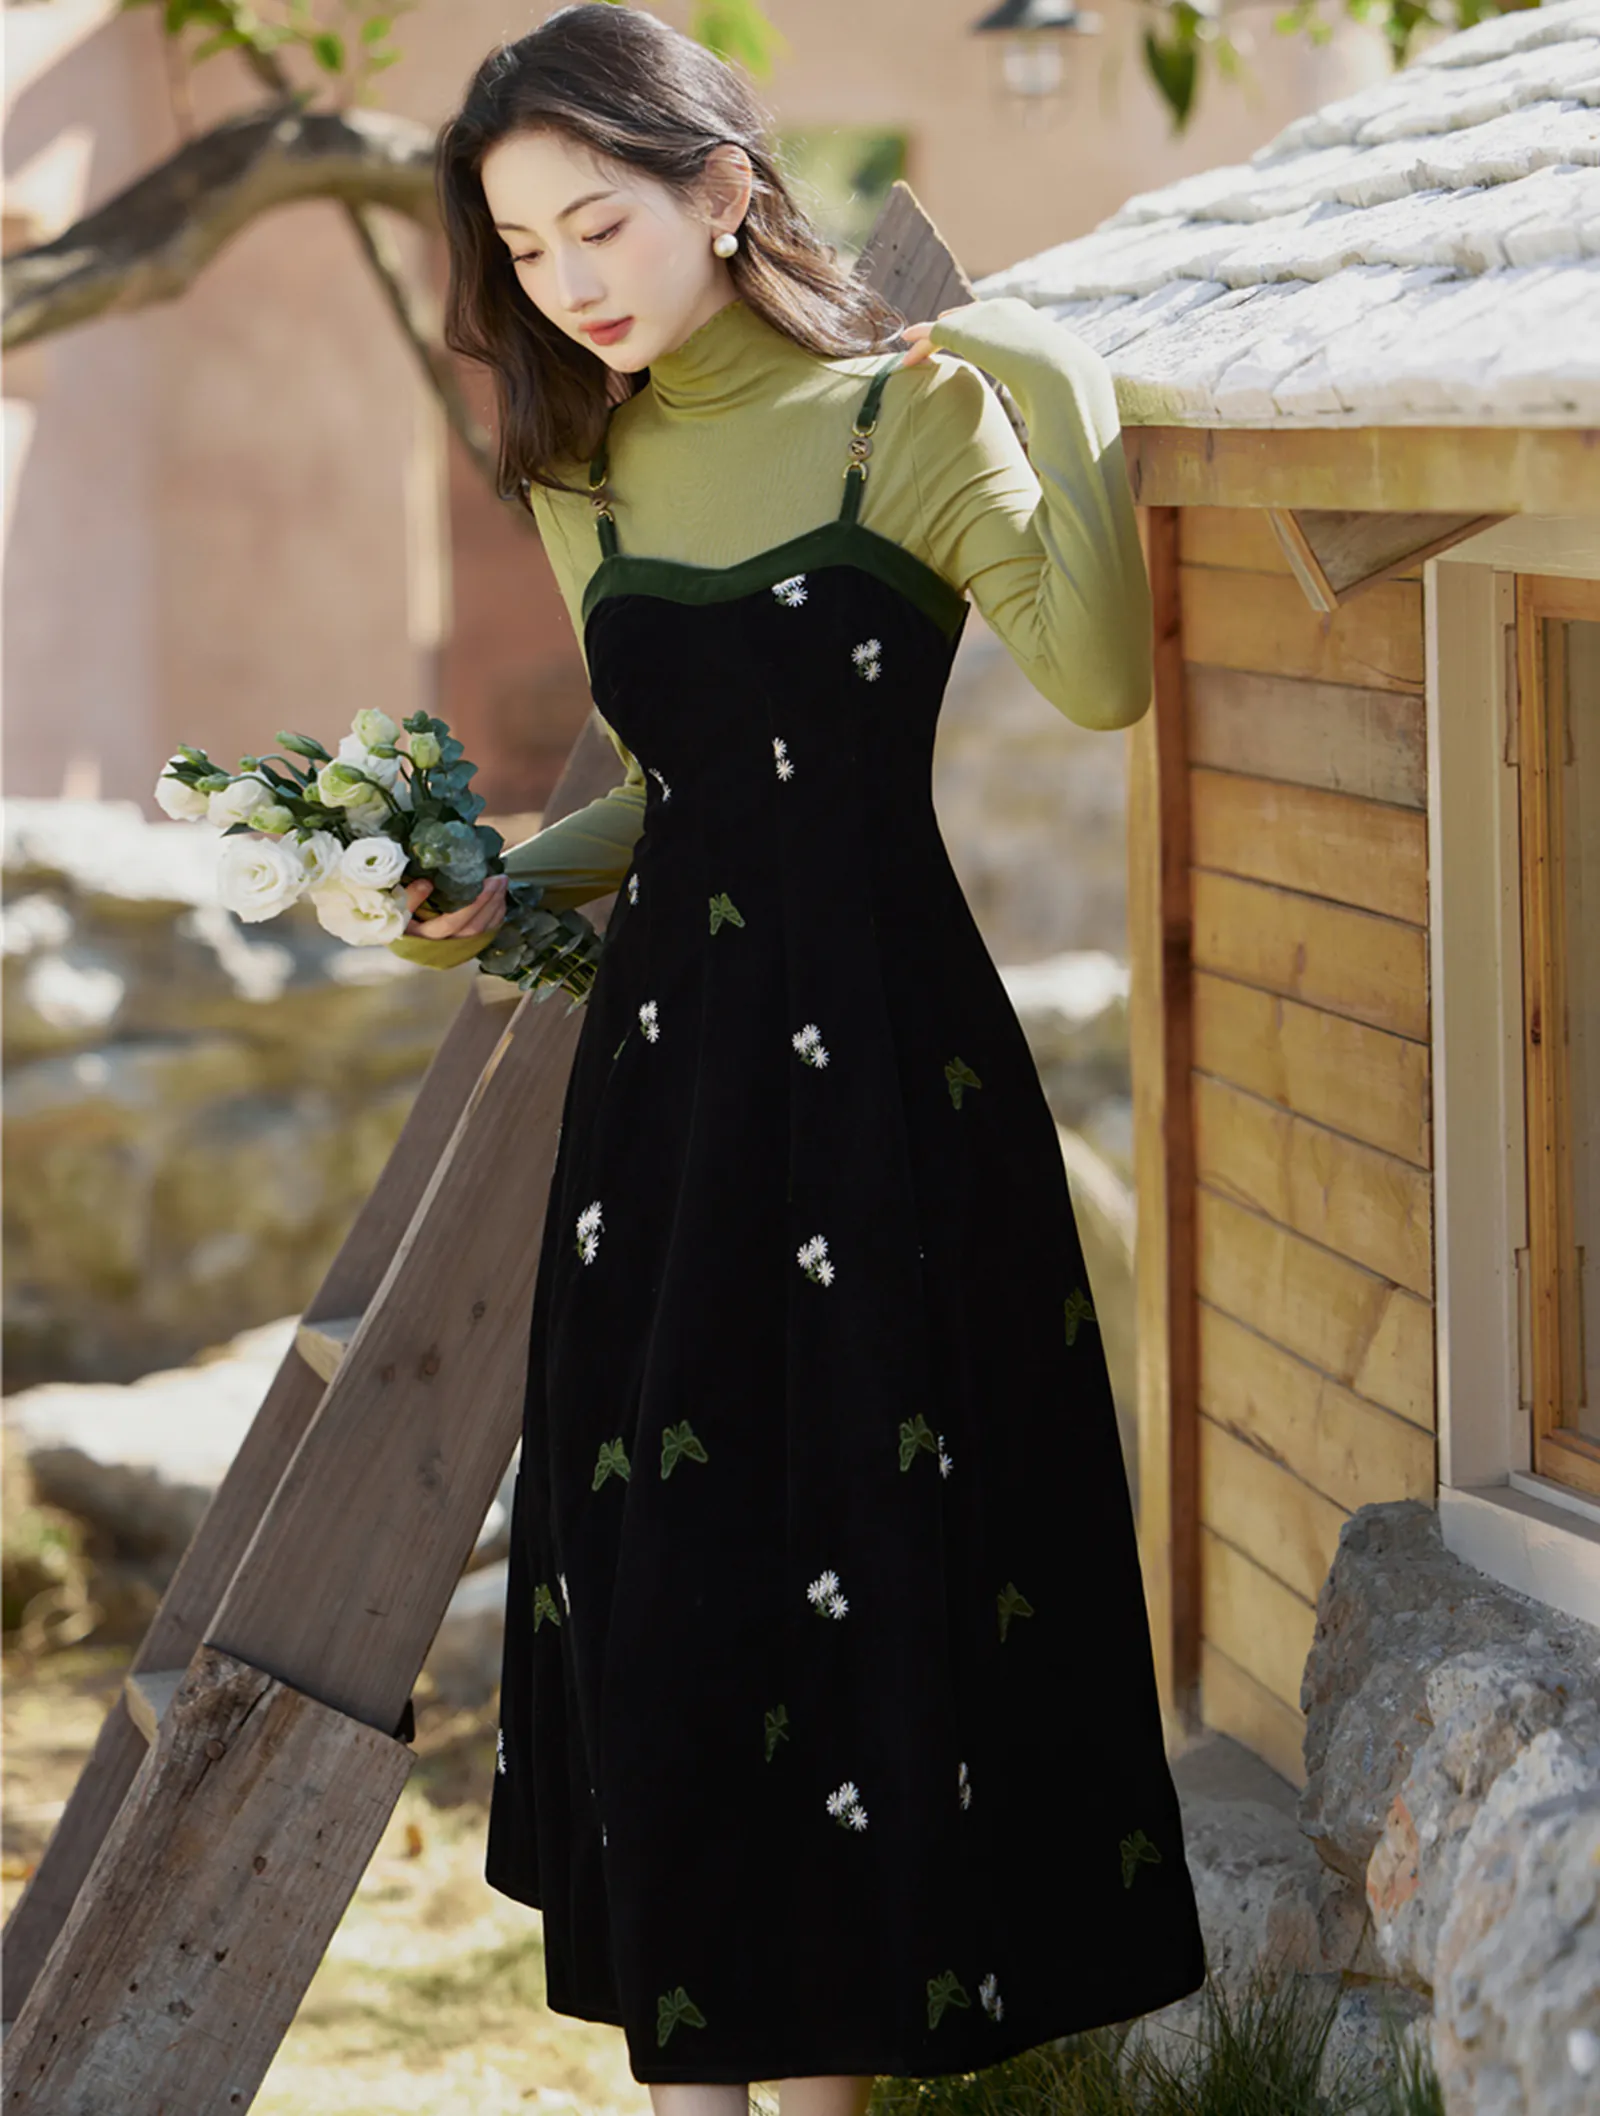 Retro Embroidery Black Velvet Slip Dress with Green Knit Sweater Suit03